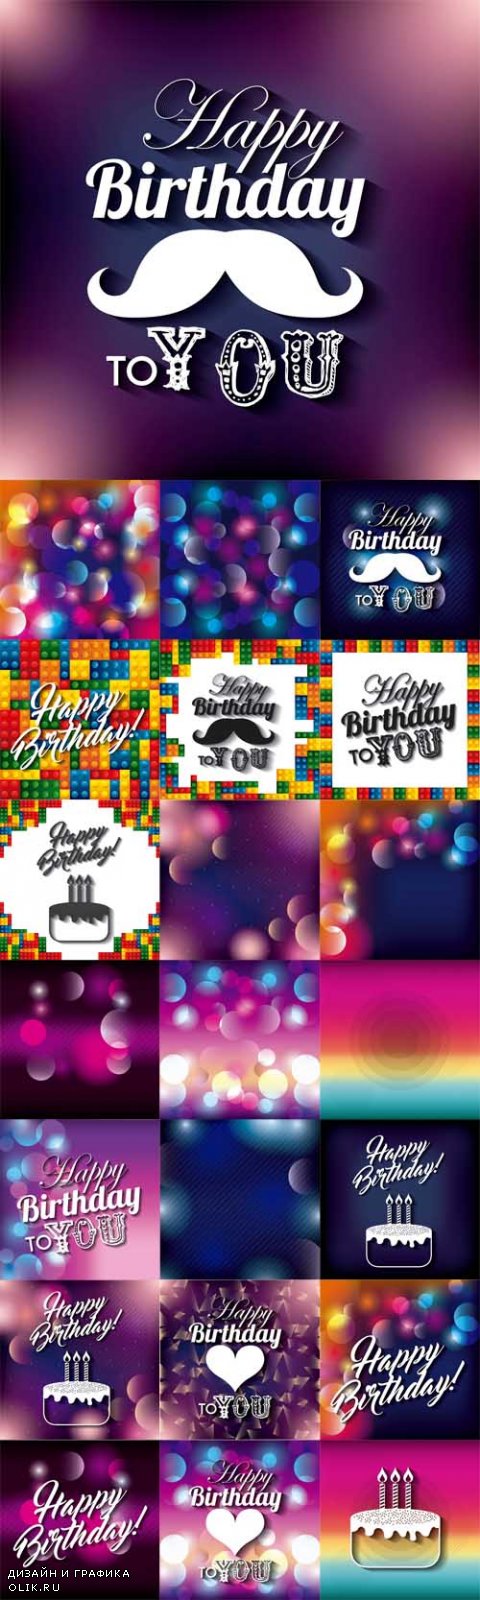 Vector Blurred Backgrounds and Happy Birthday Design